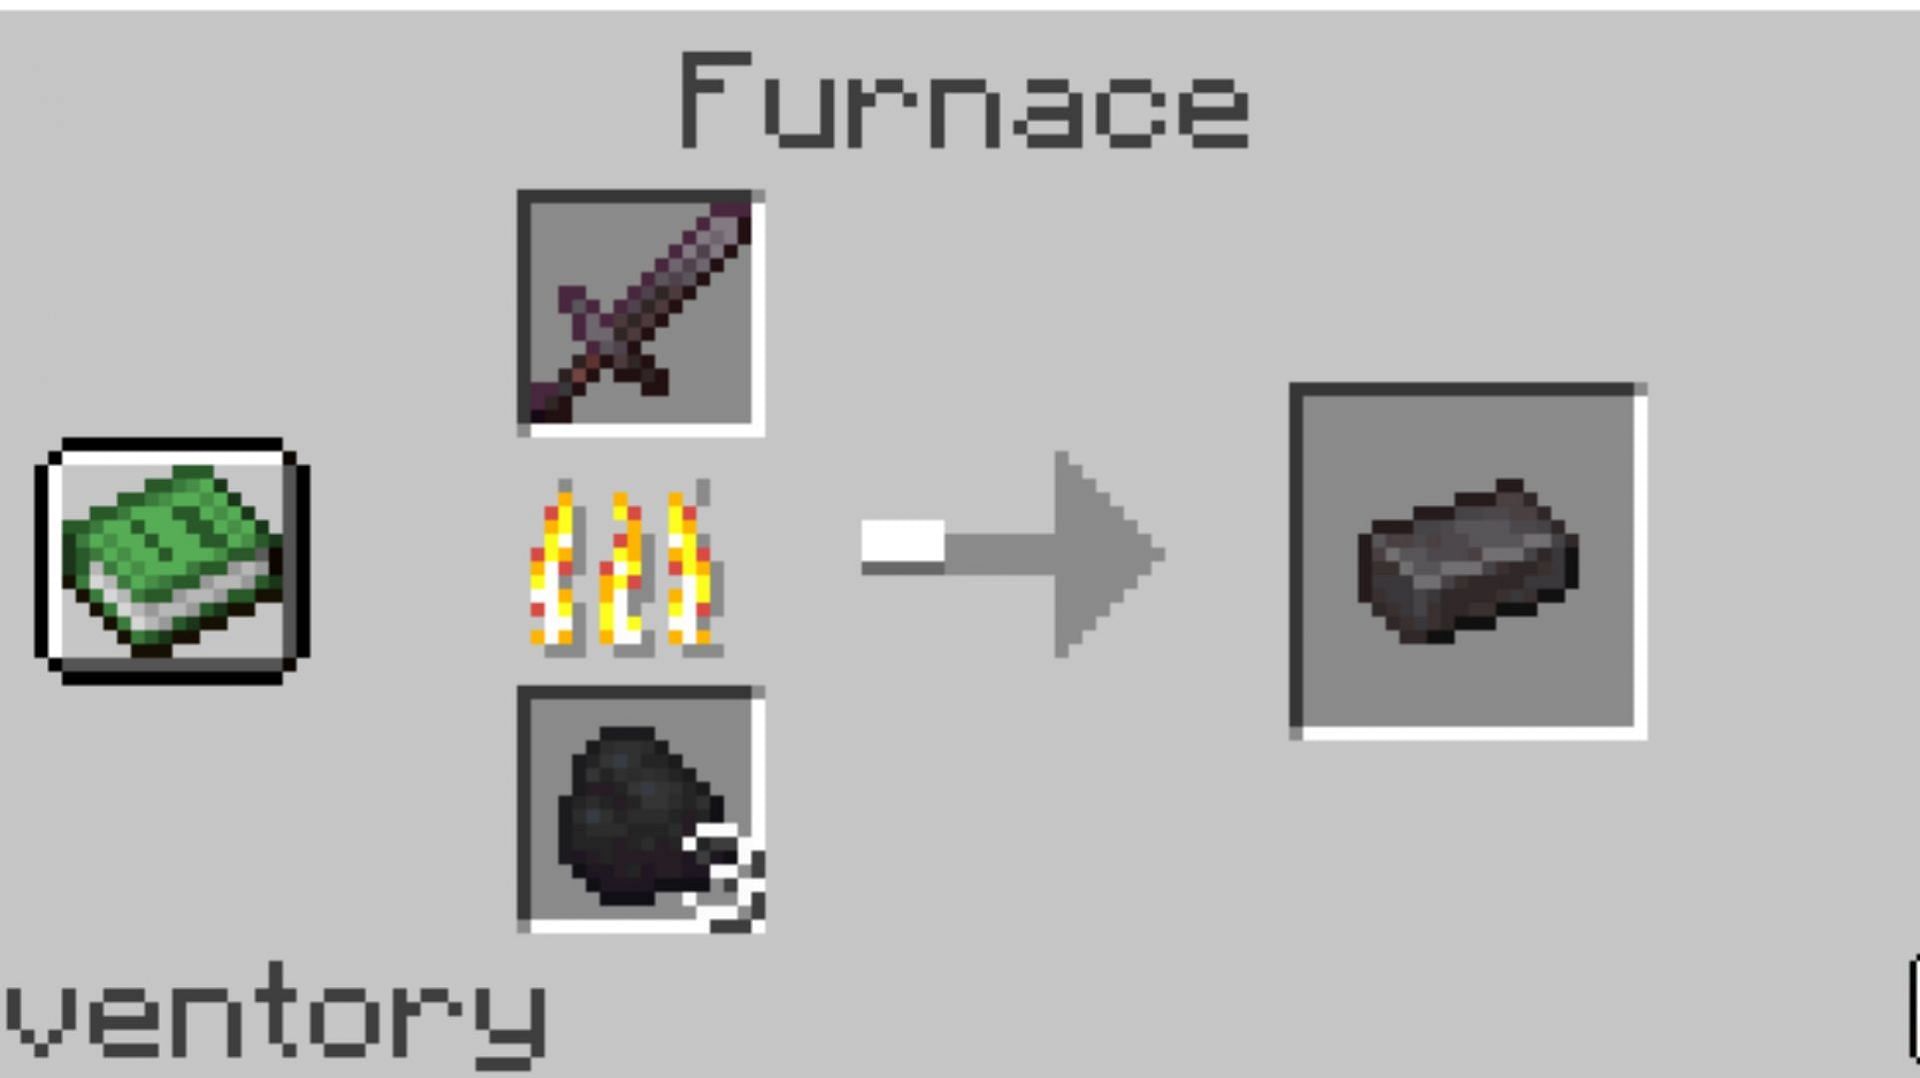 The DarkSmelting mod allows players to smelt armor, tools, and weapons to obtain ingots (Image via CurseForge)